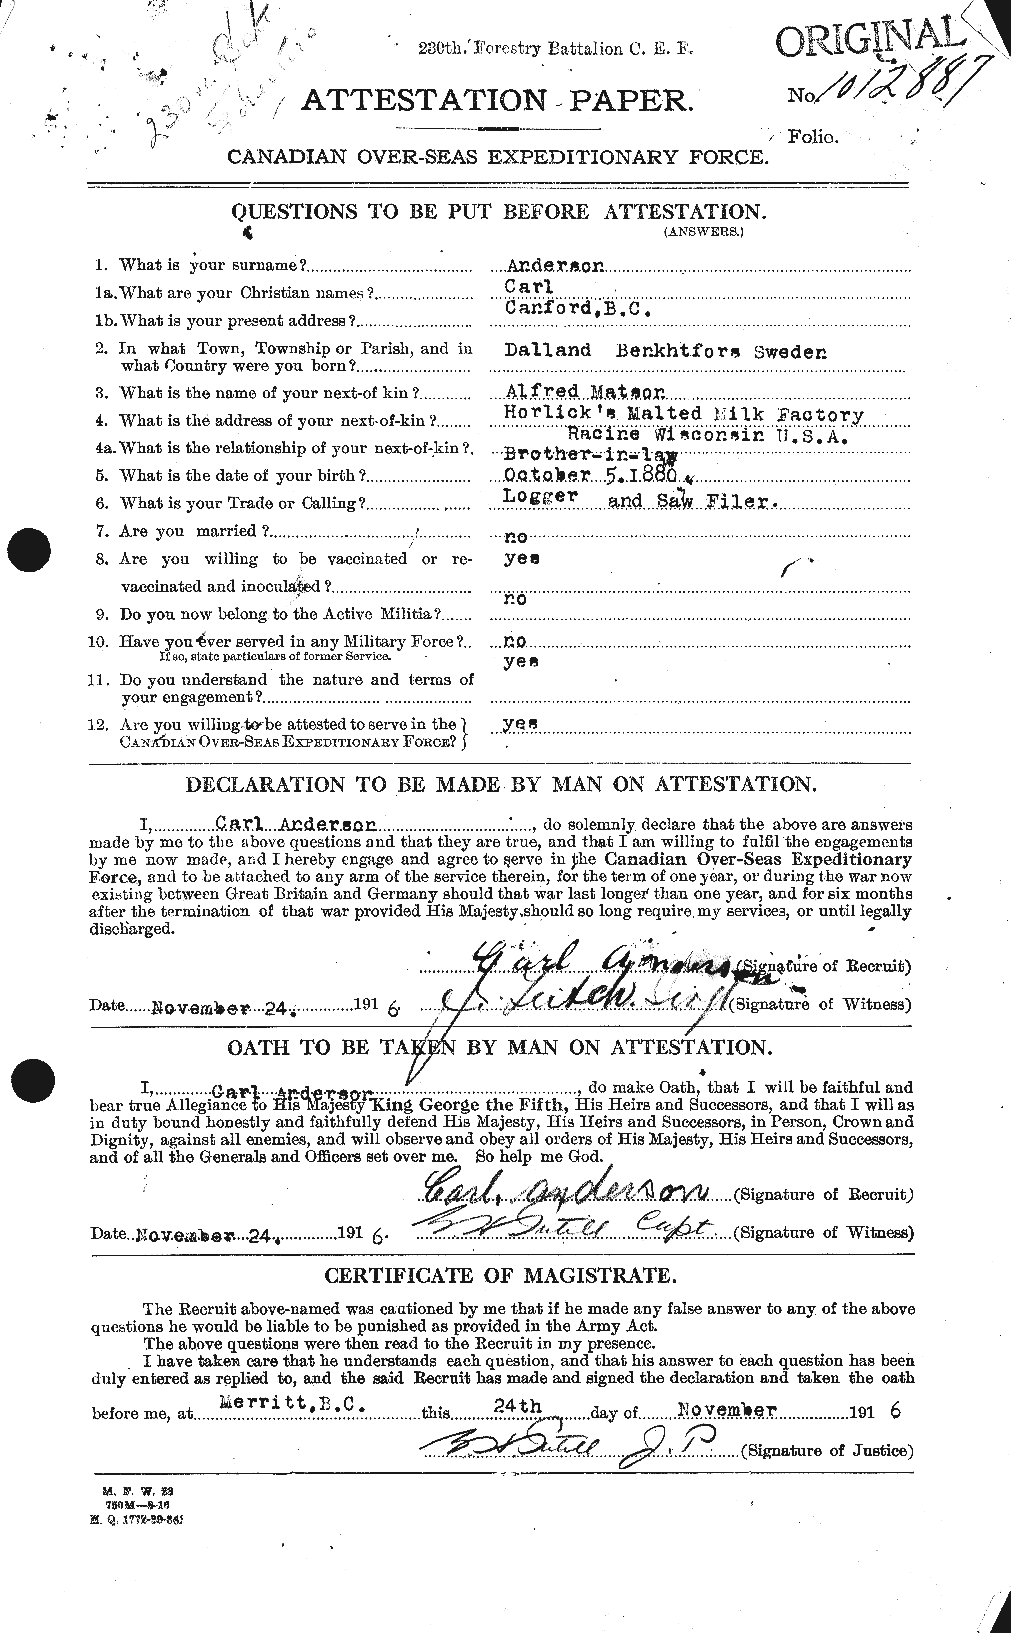 Personnel Records of the First World War - CEF 209293a